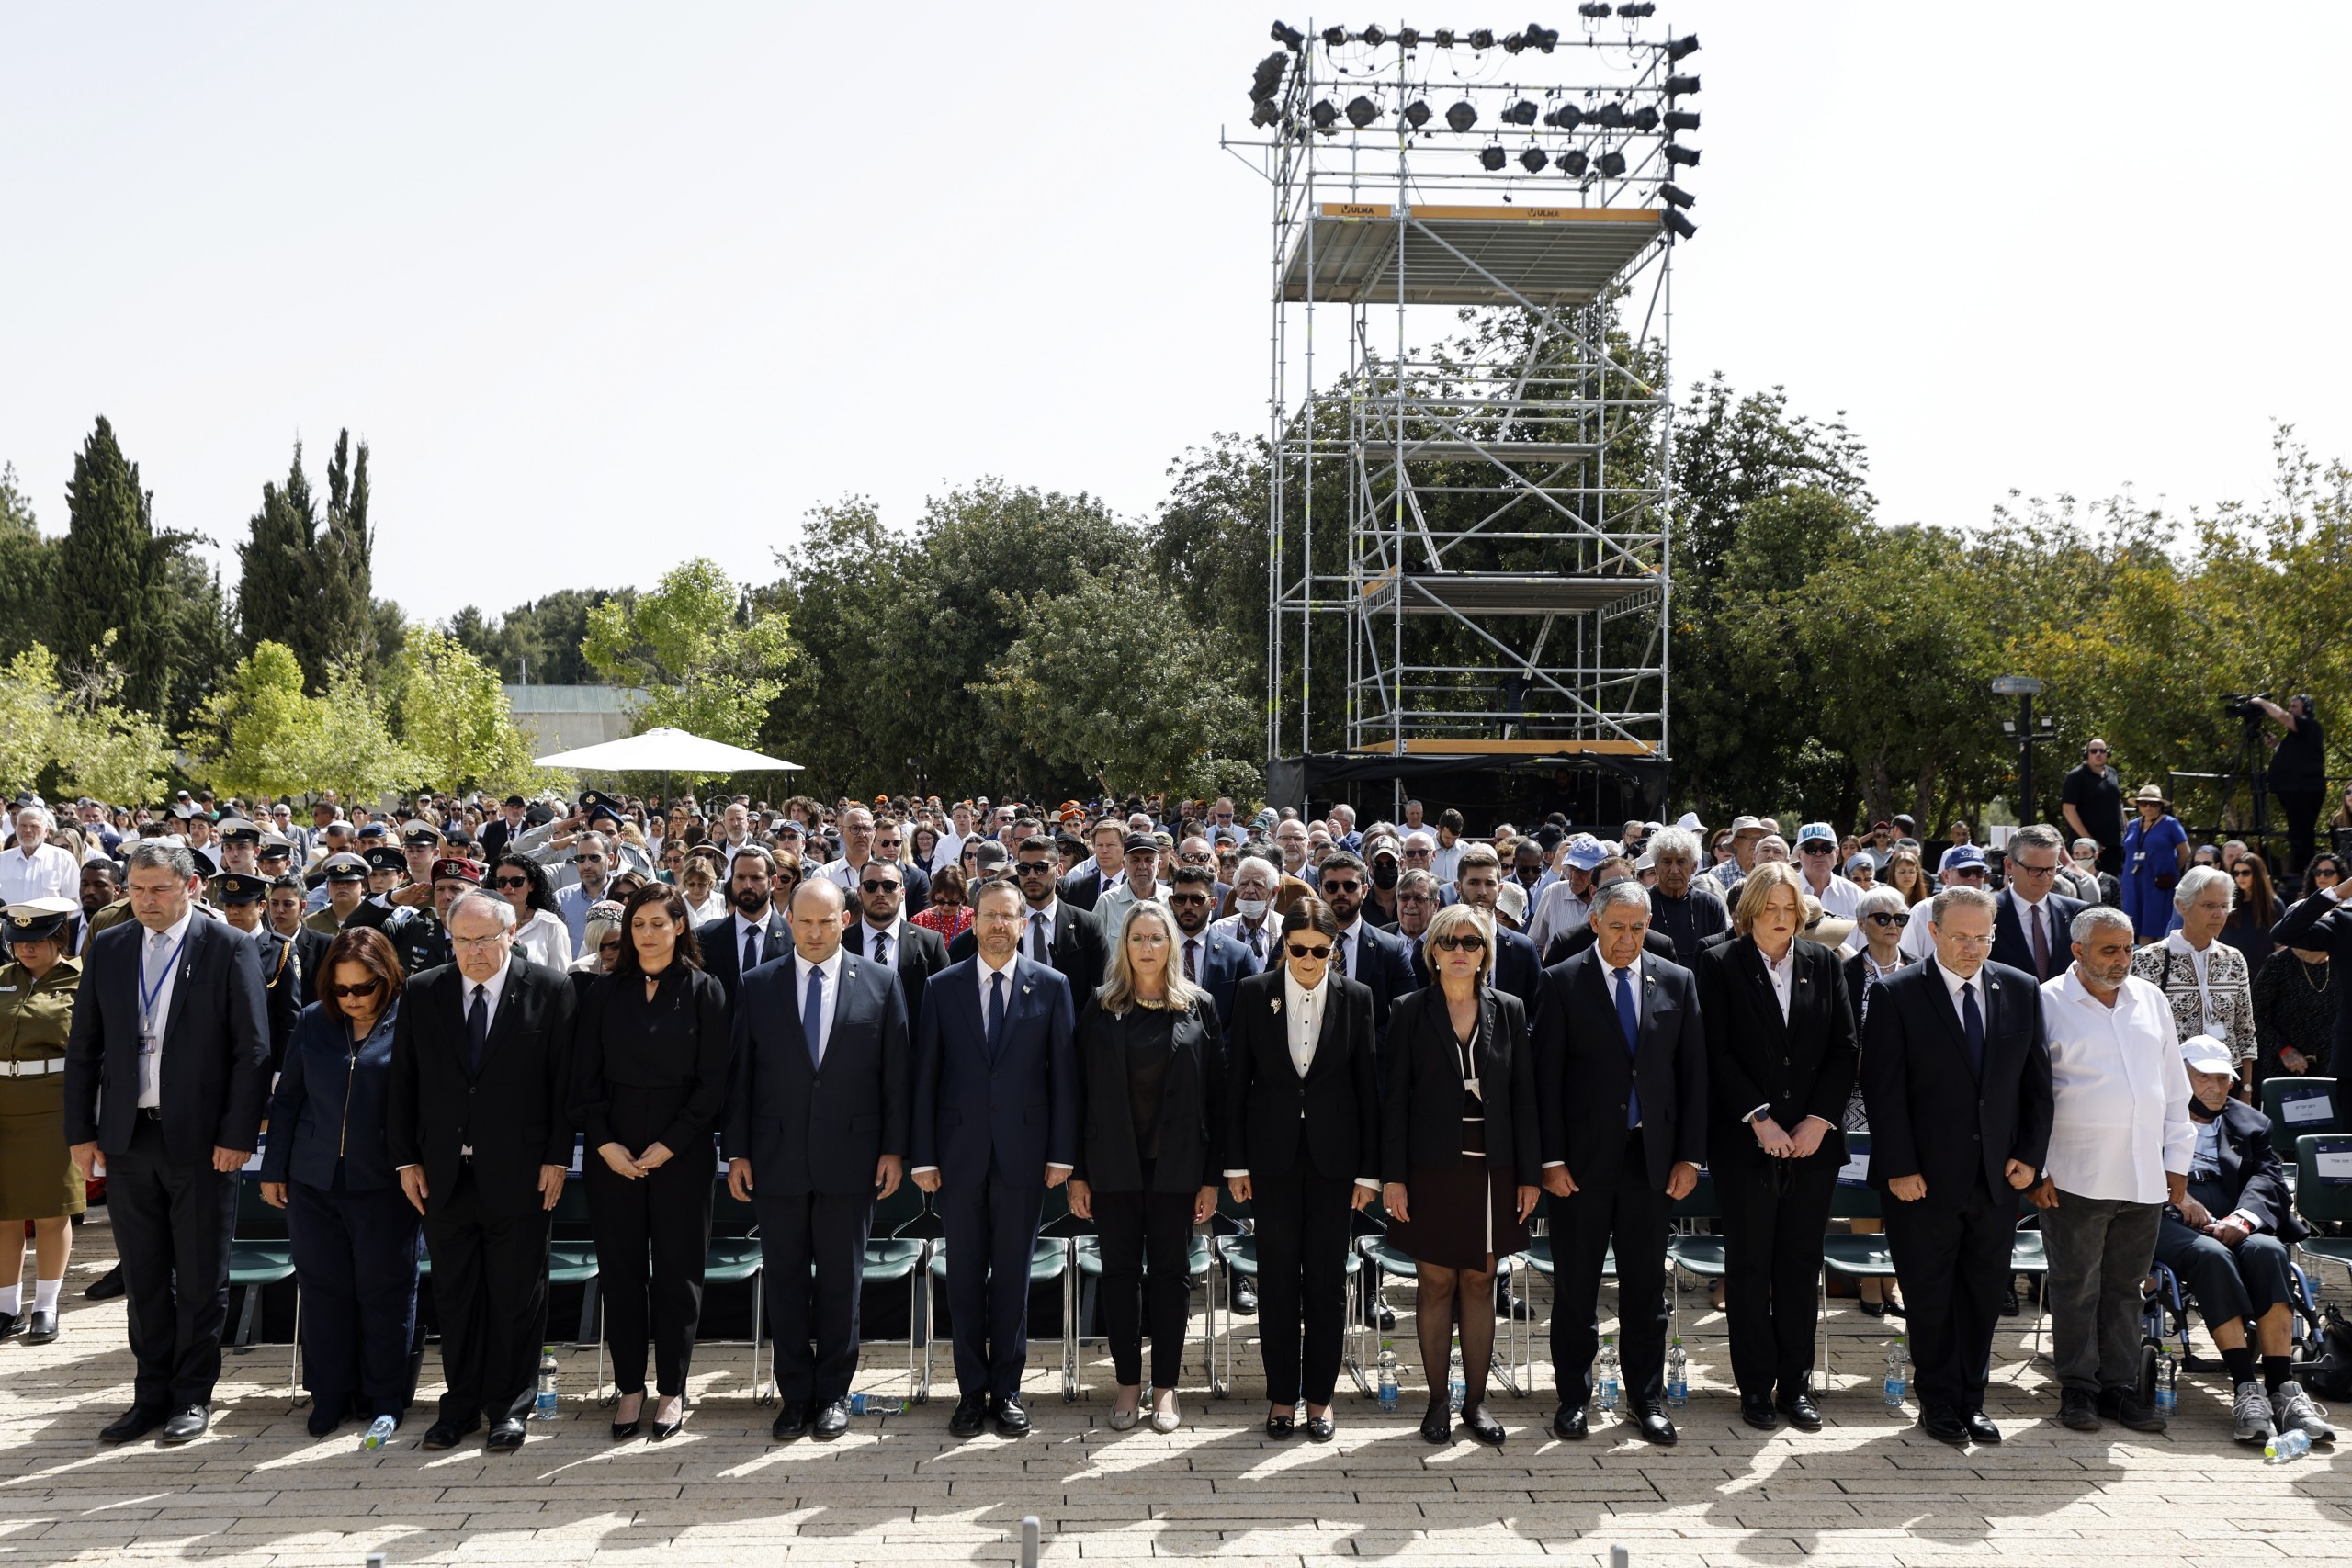 epa09913814 Israeli Prime Minister Naftali Bennett (5-L) and President Isaac Herzog (6-L) stand  together with other officials during the ceremony marking Holocaust Remembrance Day at Warsaw Ghetto Square at the Yad Vashem Holocaust Memorial in Jerusalem, Israel, 28 April 2022.  EPA/AMIR COHEN / POOL